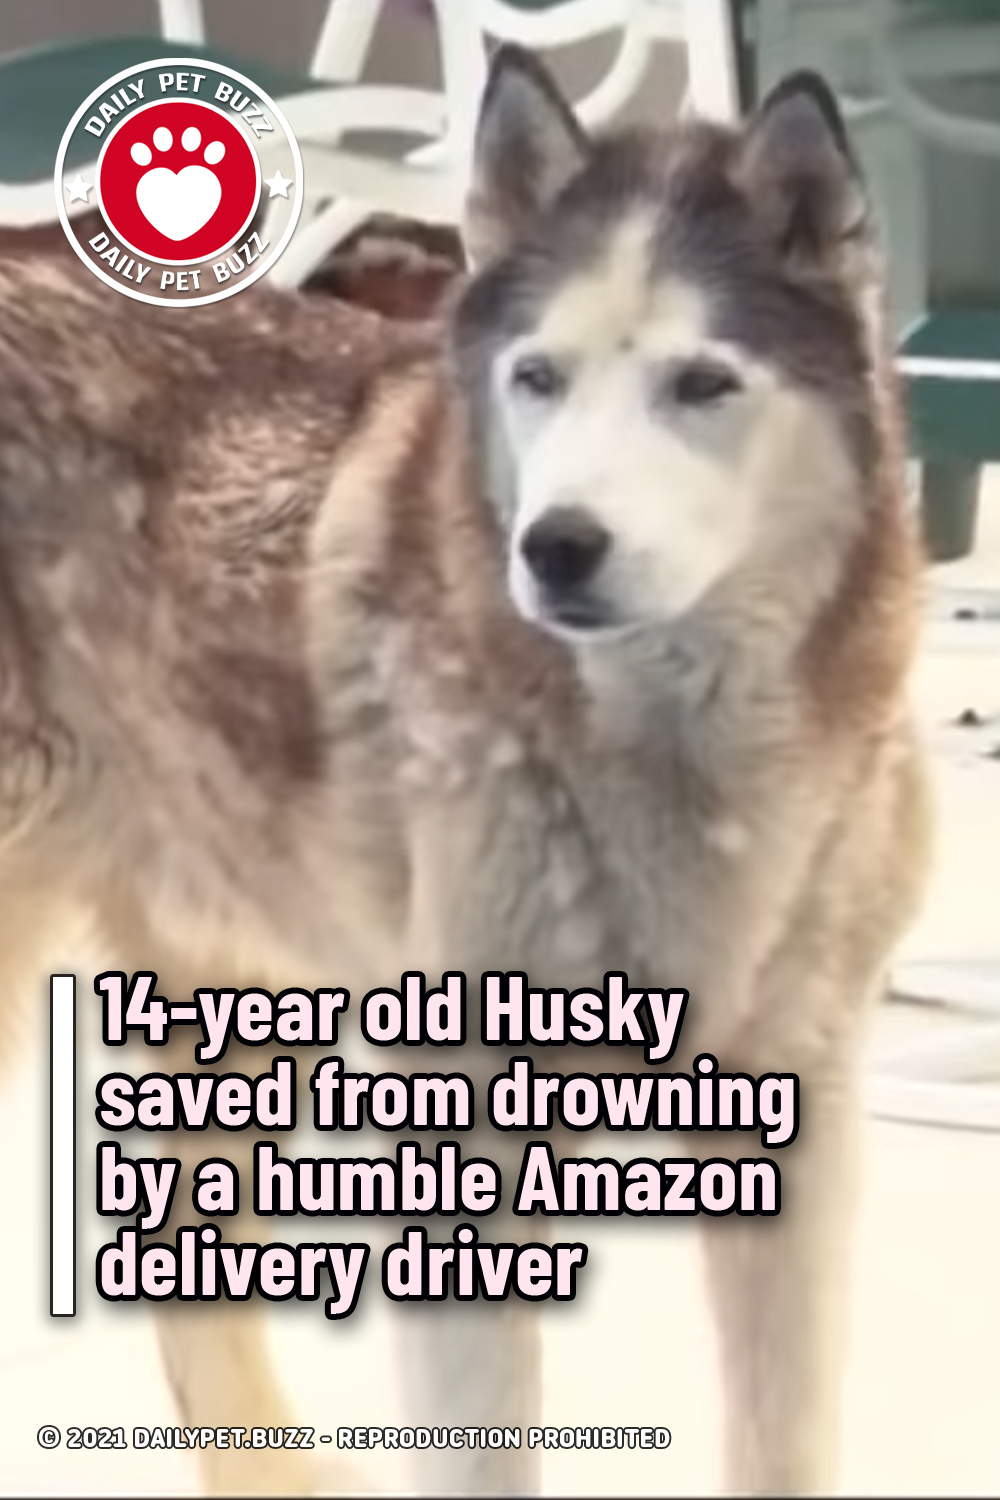 14-year old Husky saved from drowning by a humble Amazon delivery driver